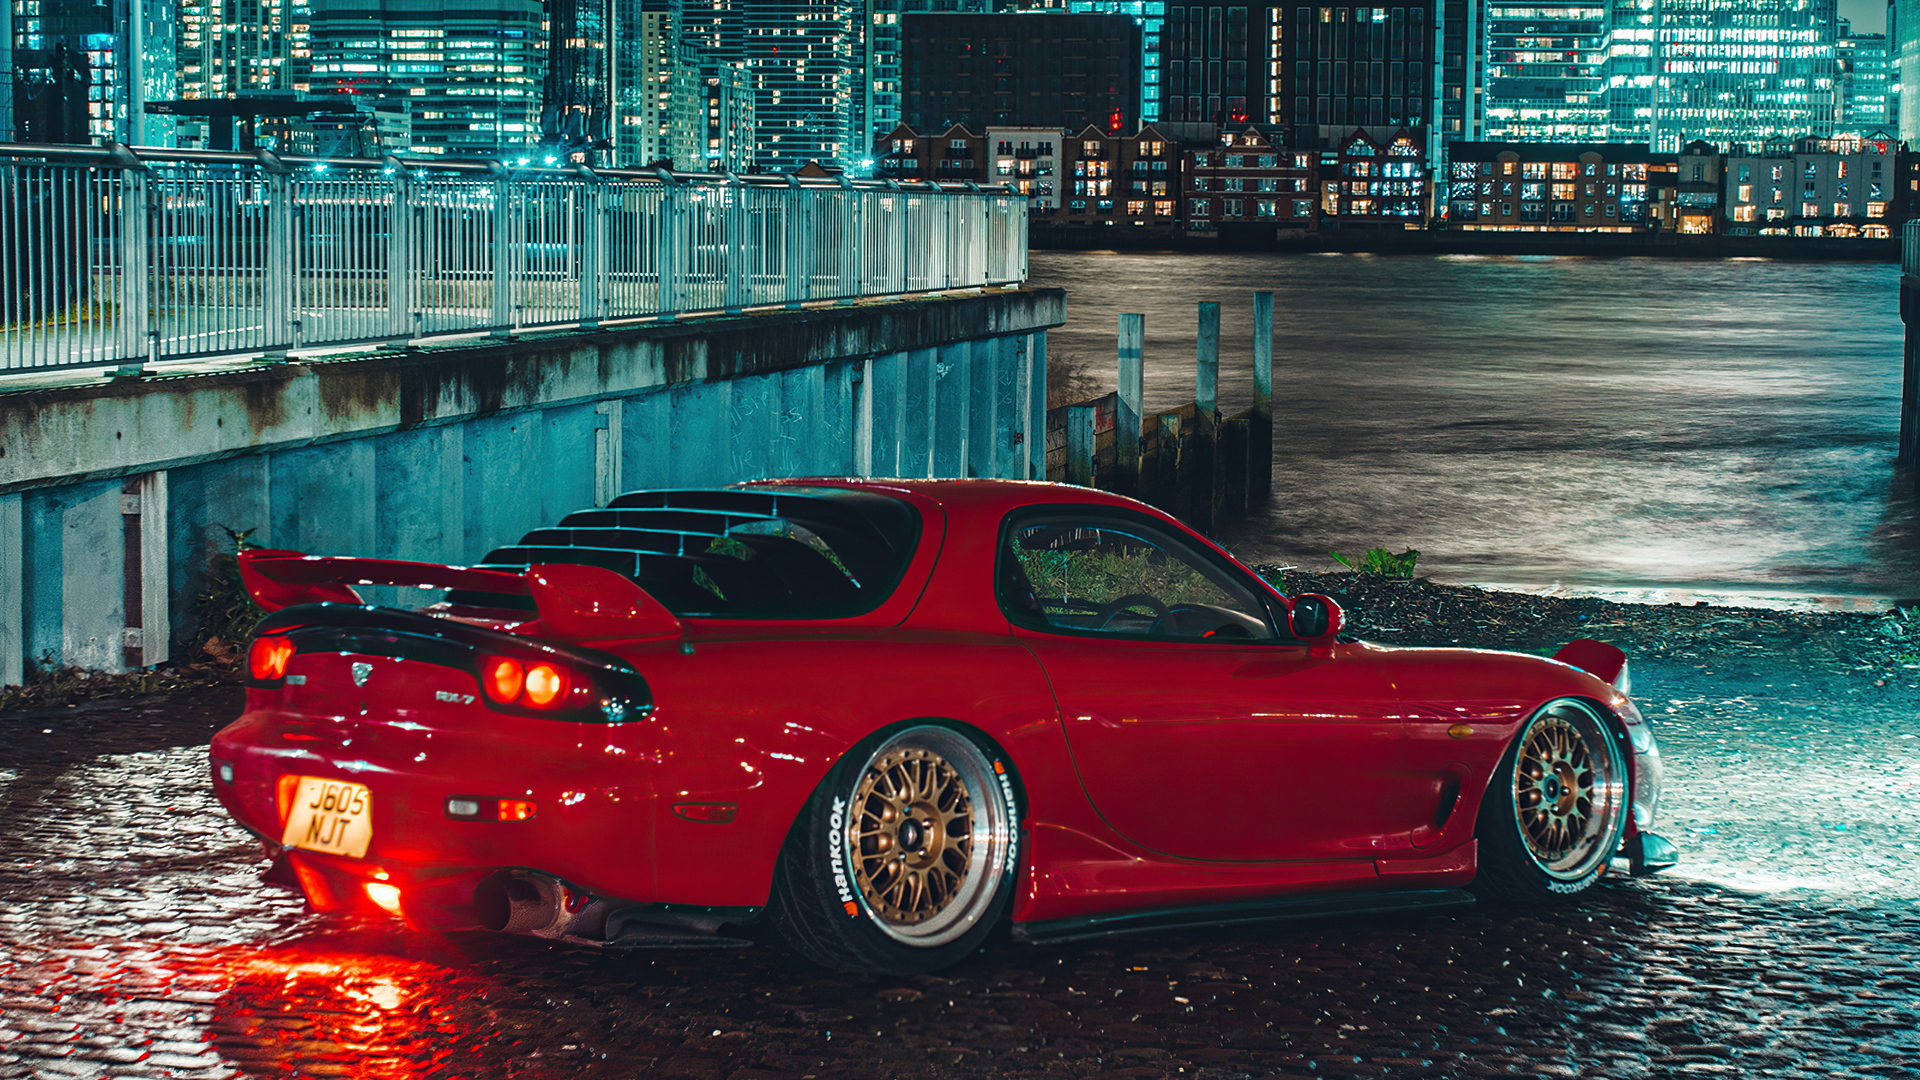 1920x1080 Red Mazda Rx7 On Streets K4 Laptop Full HD 1080P HD 4k Wallpapers, Images, Backgrounds